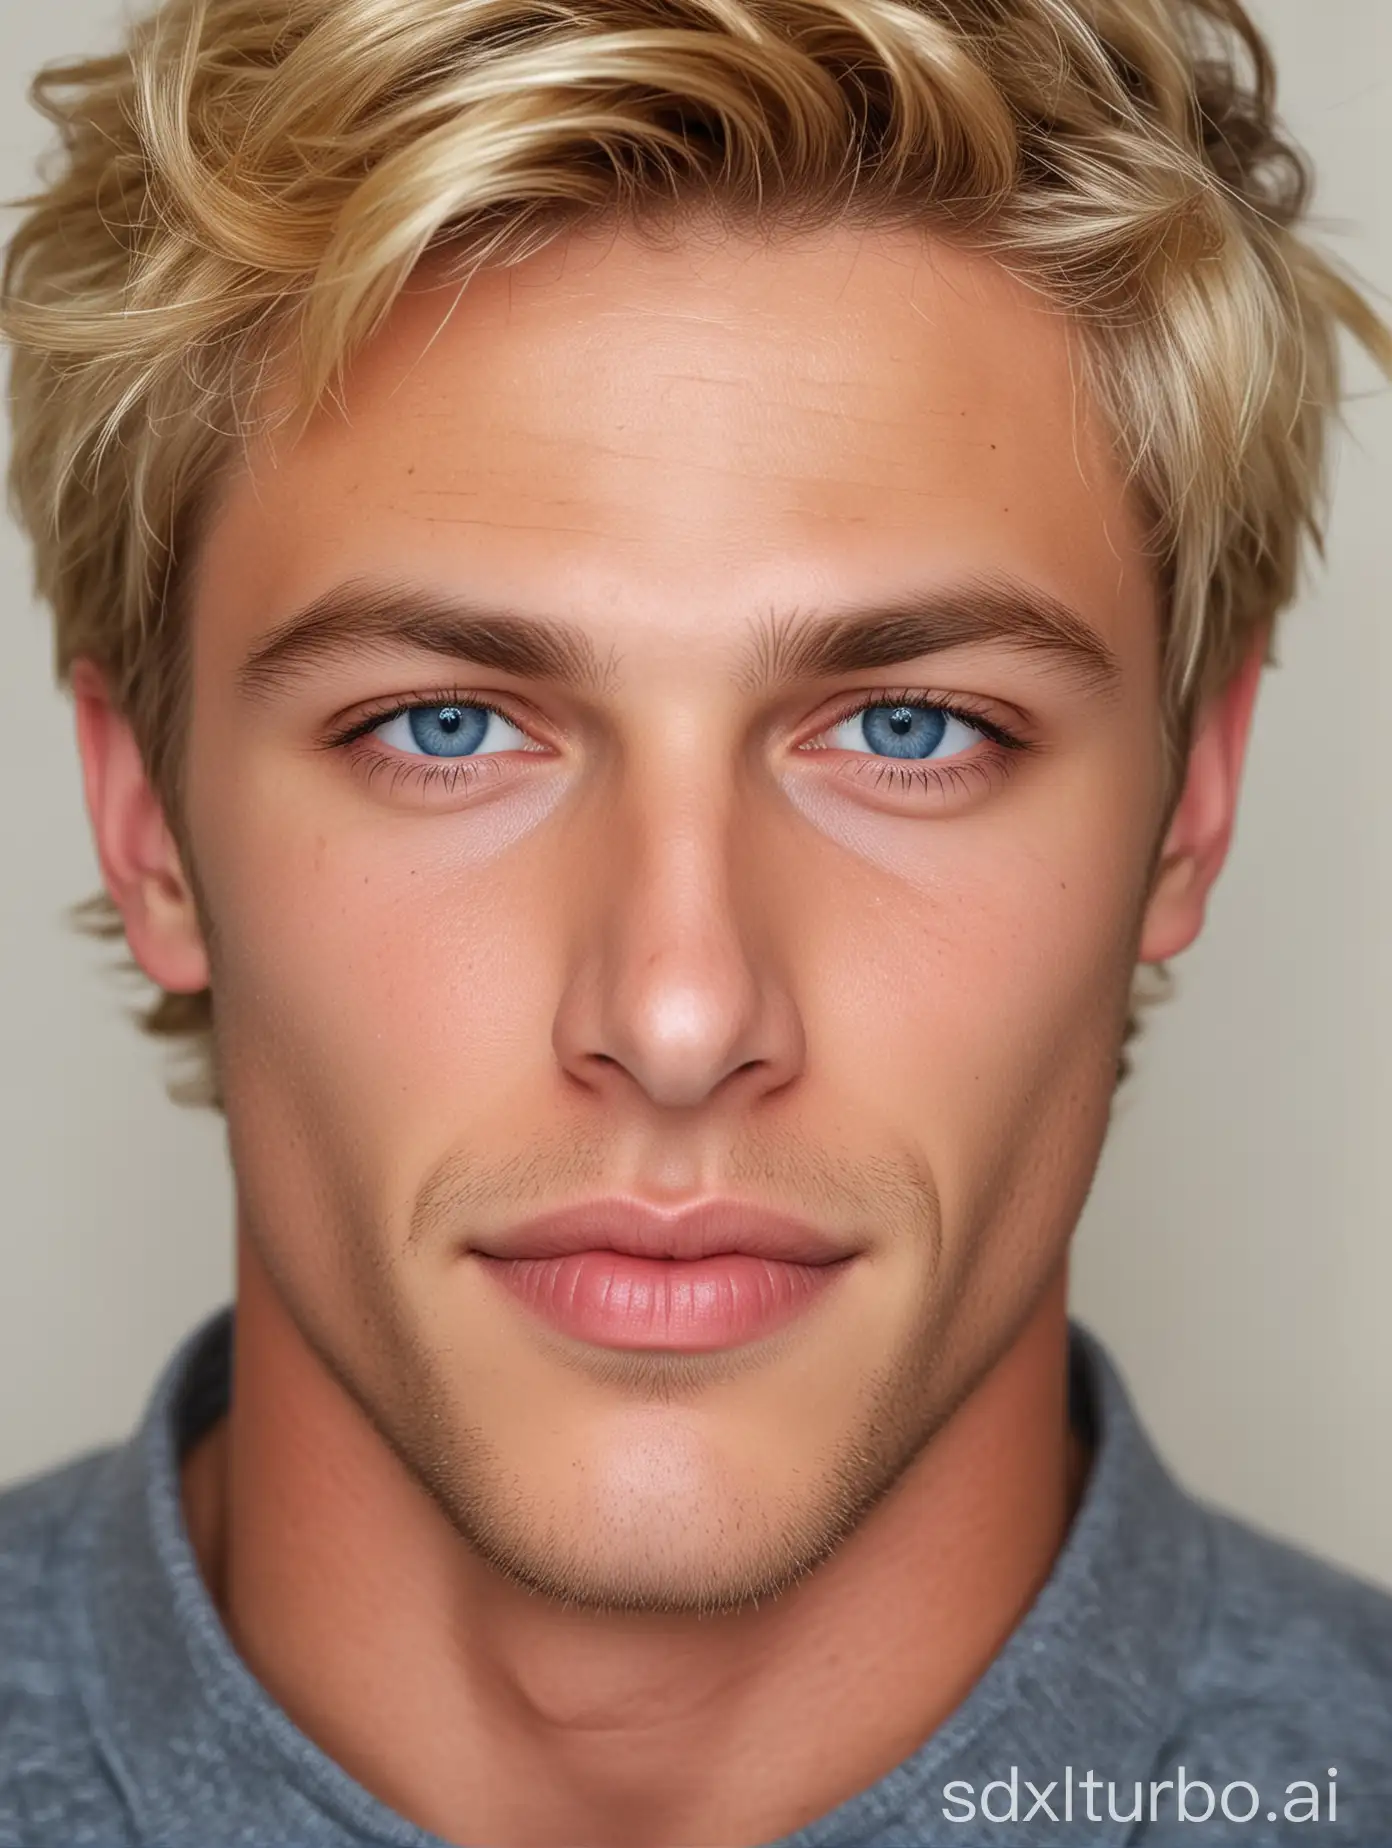 24 years  blonde hair Adonis  masculine happy face with sensual lips, blue eyes